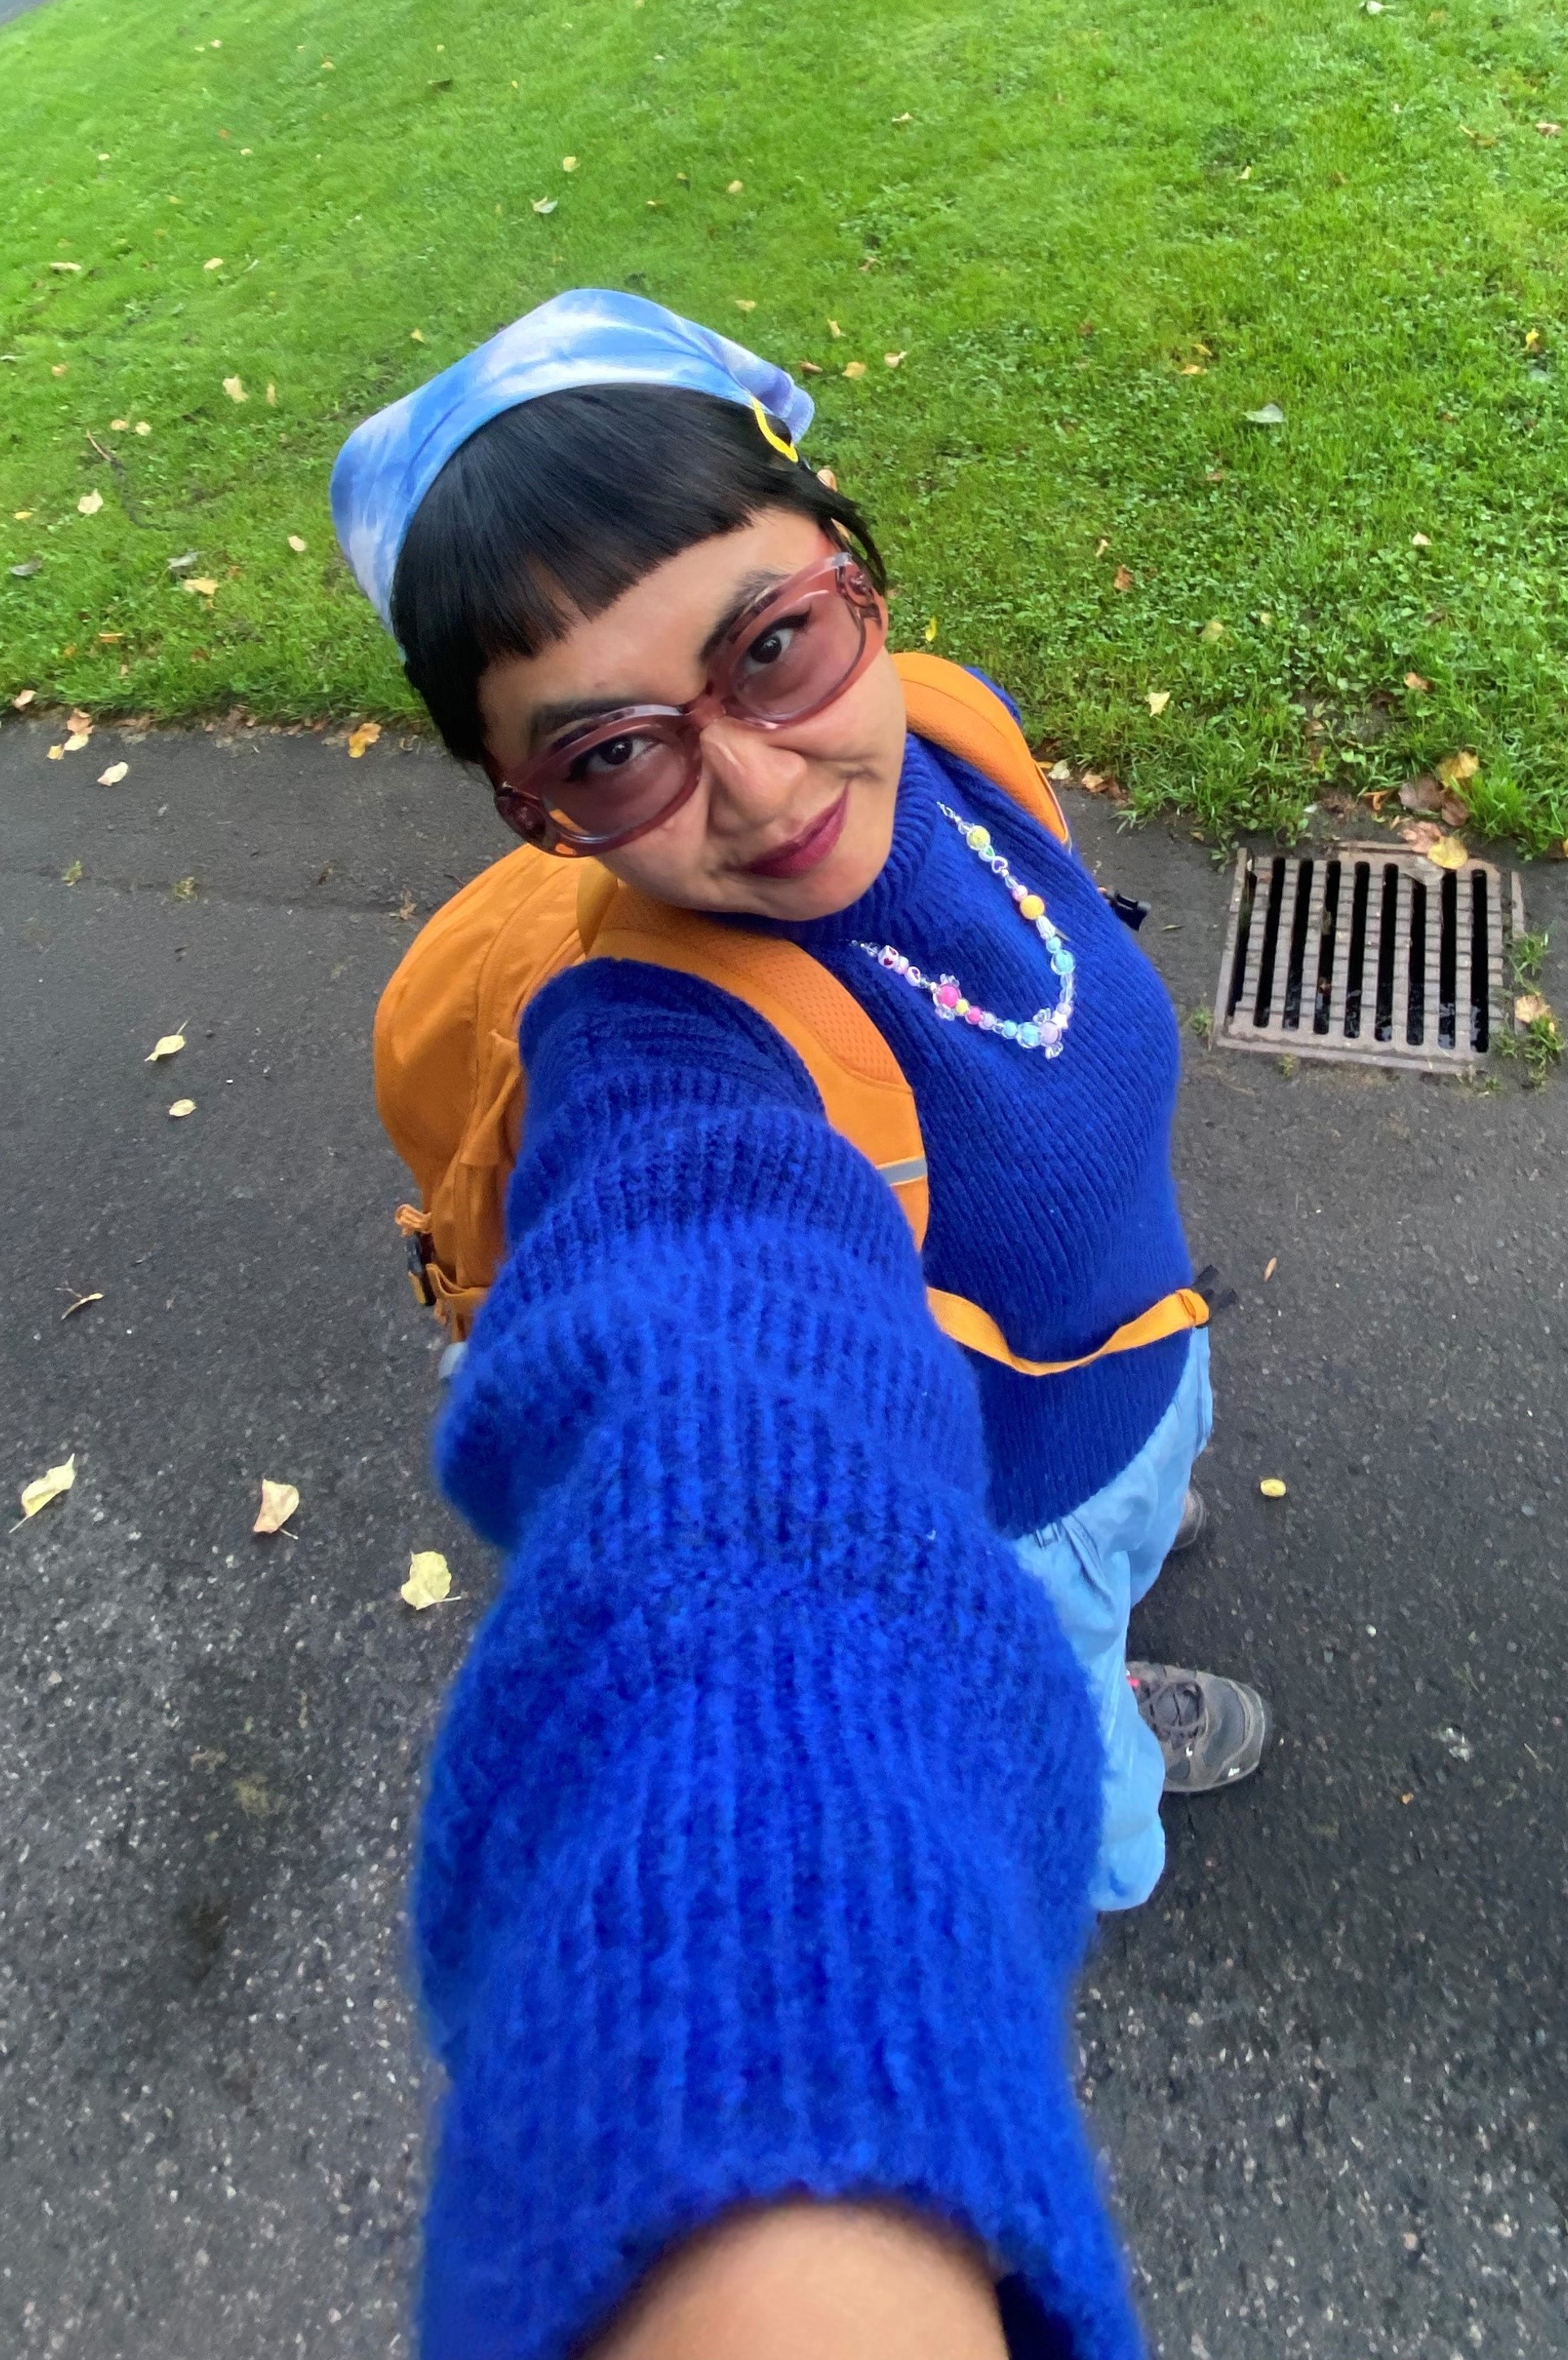 Woman in sunglasses with blue sweater